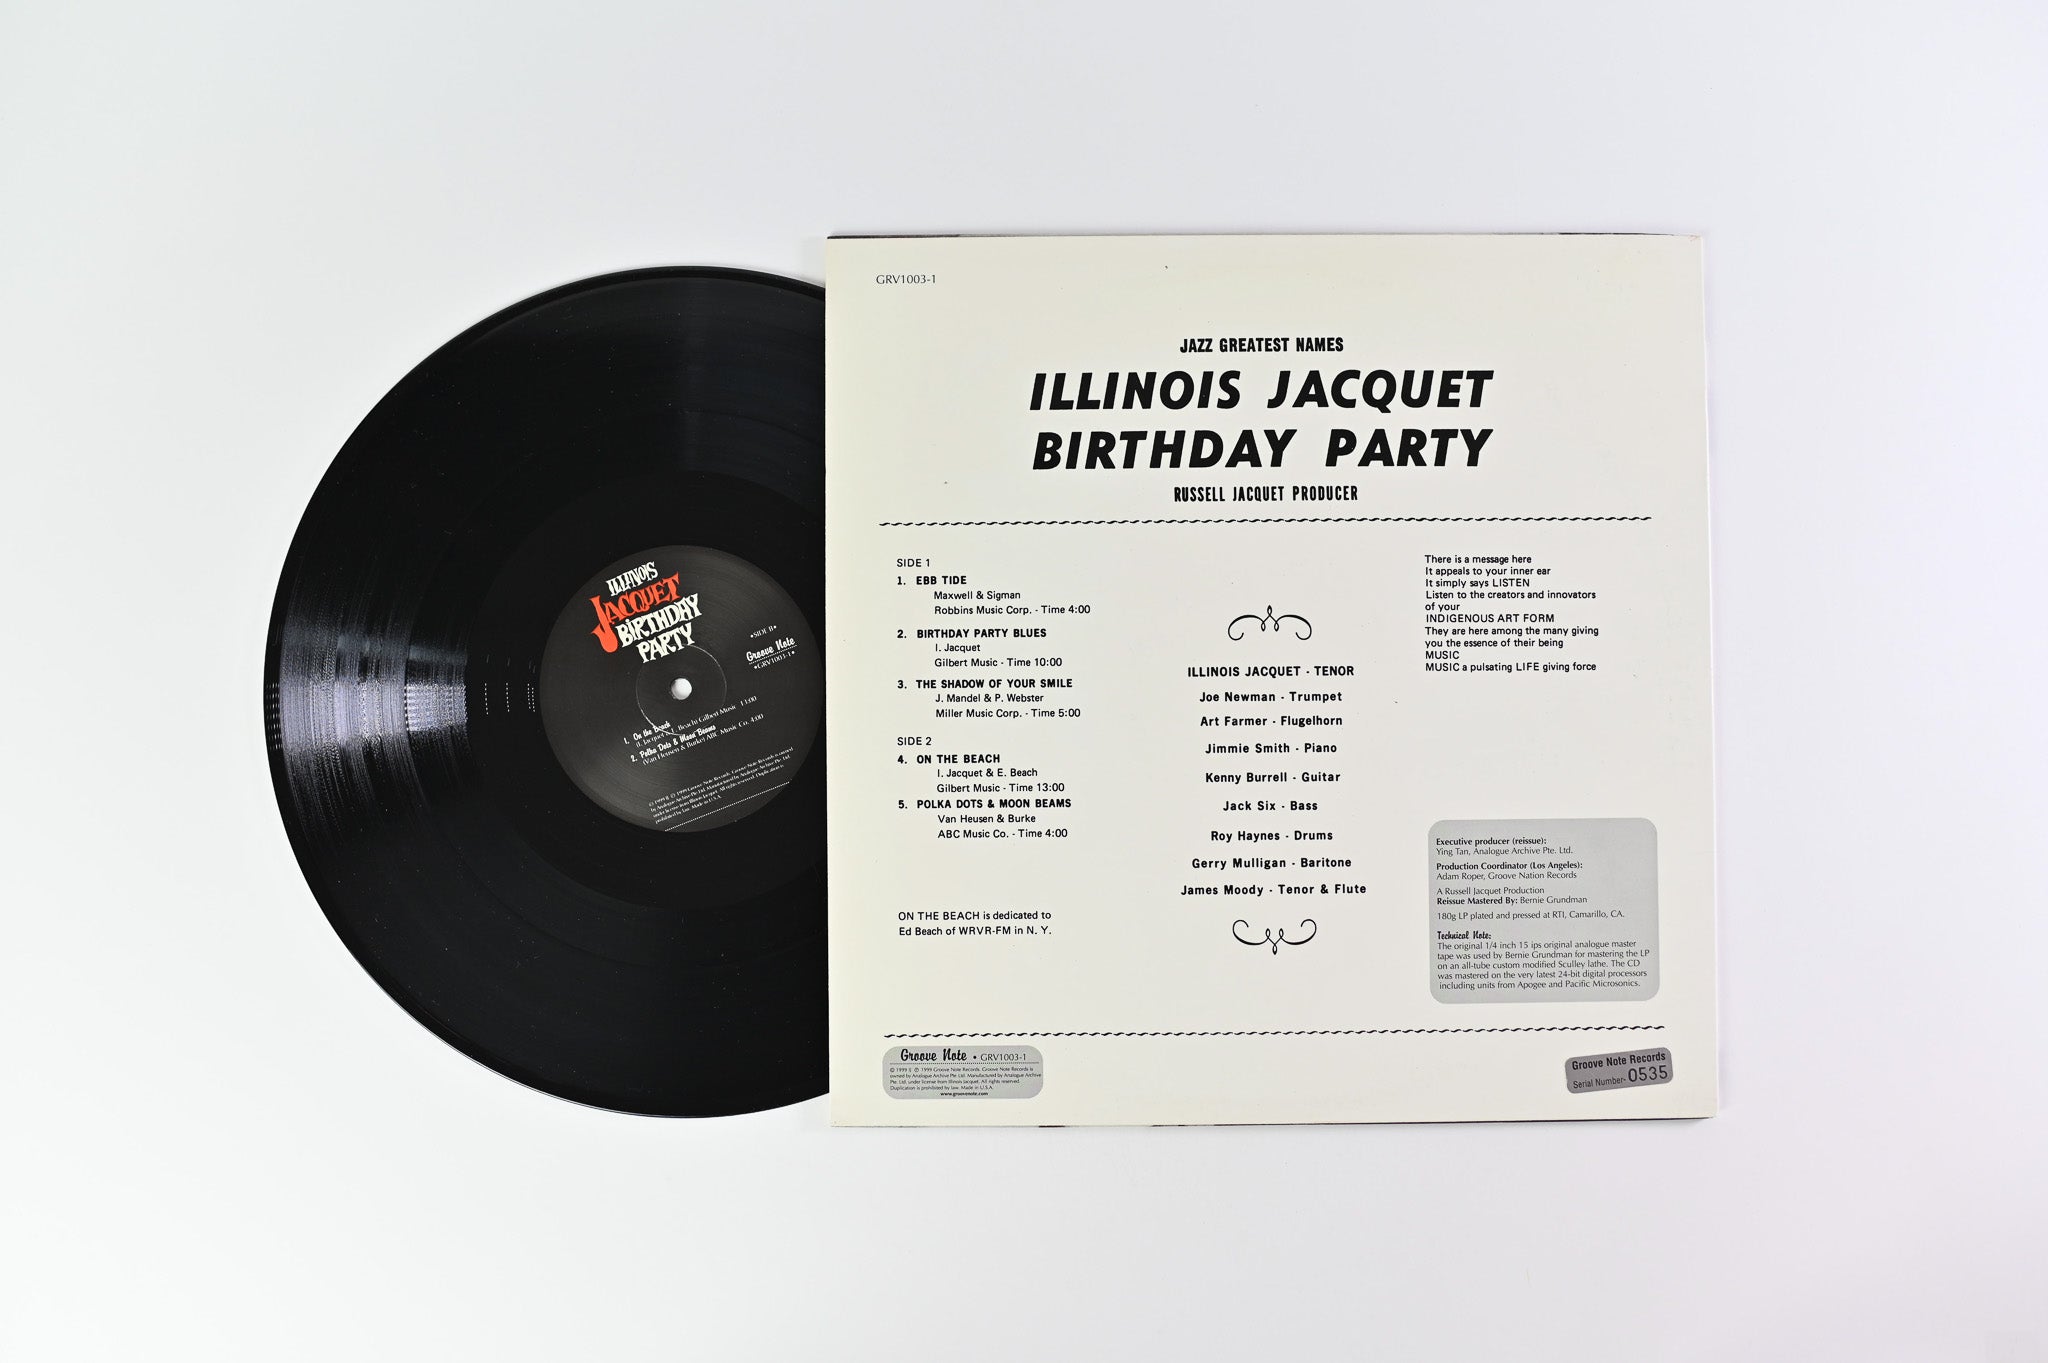 Illinois Jacquet - Birthday Party on Groove Note Ltd Numbered Reissue Plus 45 RPM 12"